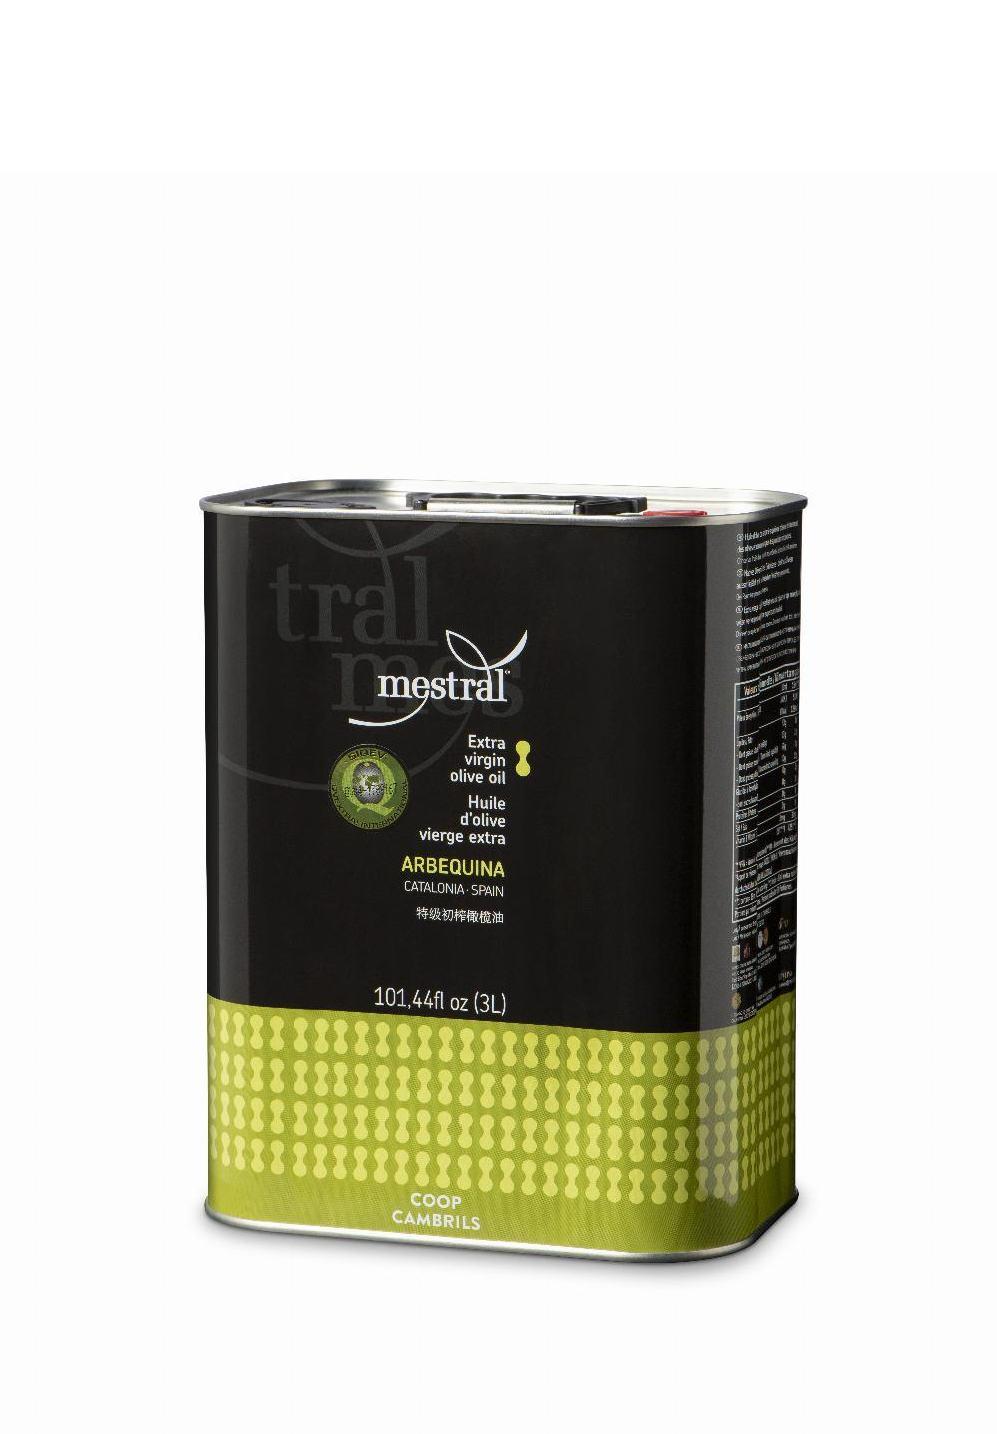 Huile d'olive et Condiments - Huile d'Olive Vierge Extra Mestral Boite 3L 100% Arbequina - Mestral Cambrils